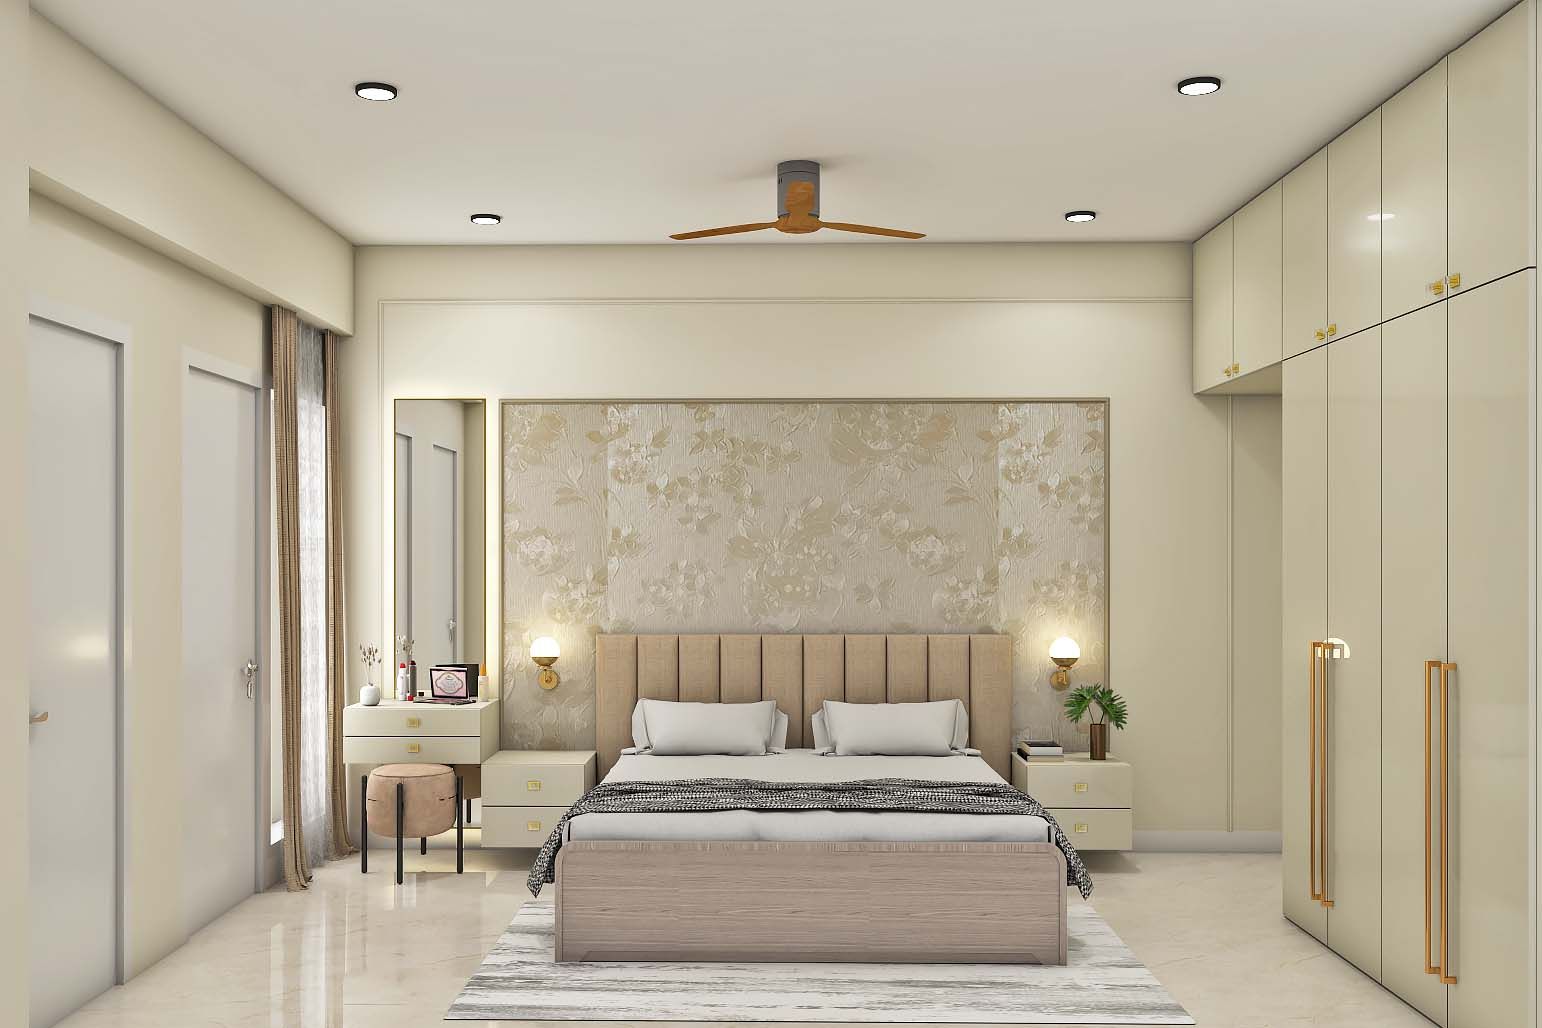 Contemporary Bedroom Design With Floral Wallpaper